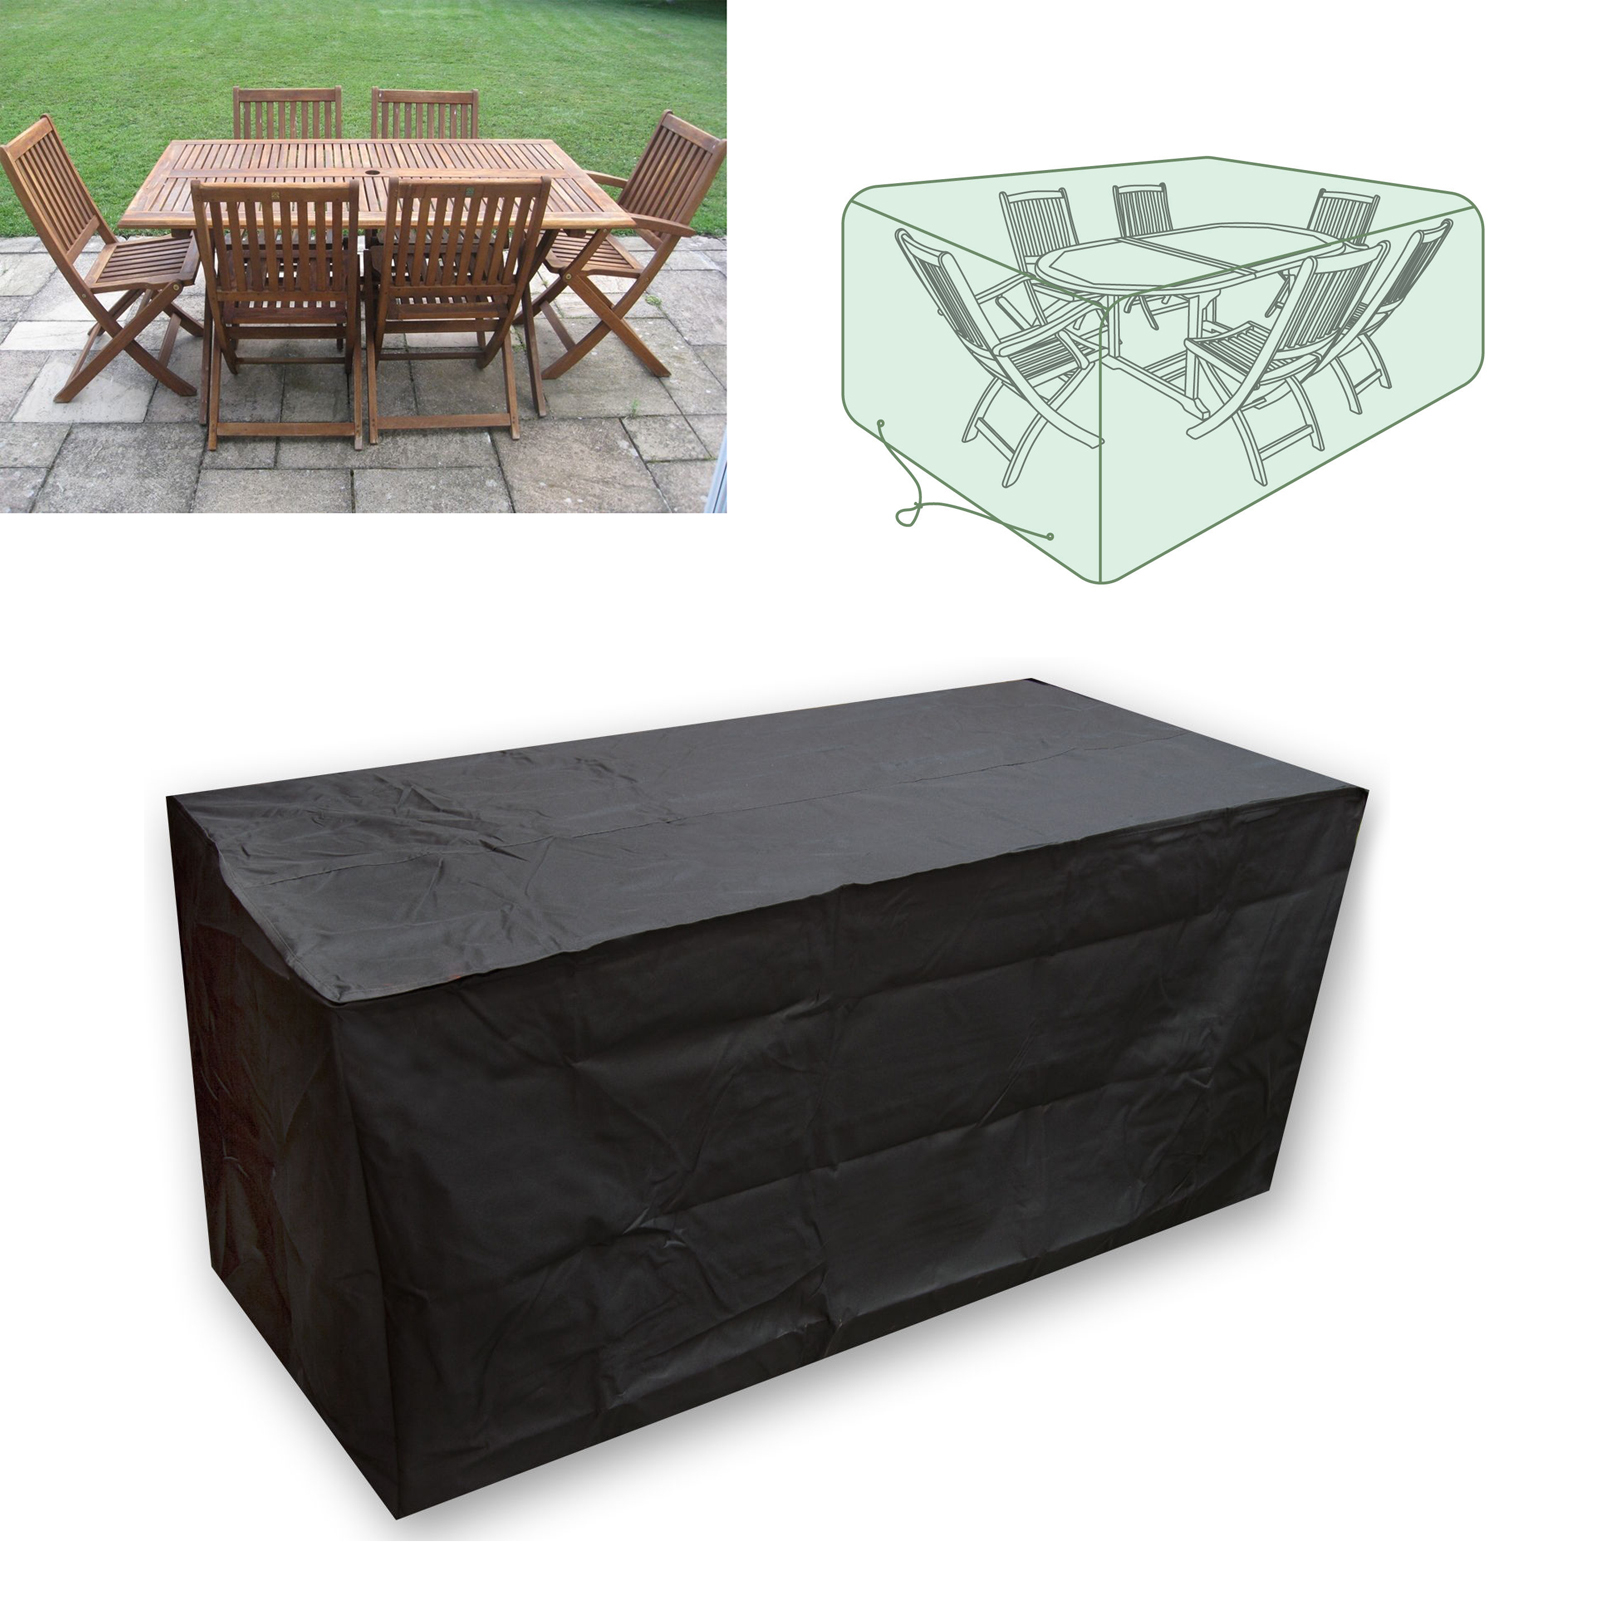 Details About Xl Waterproof Garden Patio Furniture Cover Covers For Rattan Table Cube Outdoor inside size 1600 X 1600